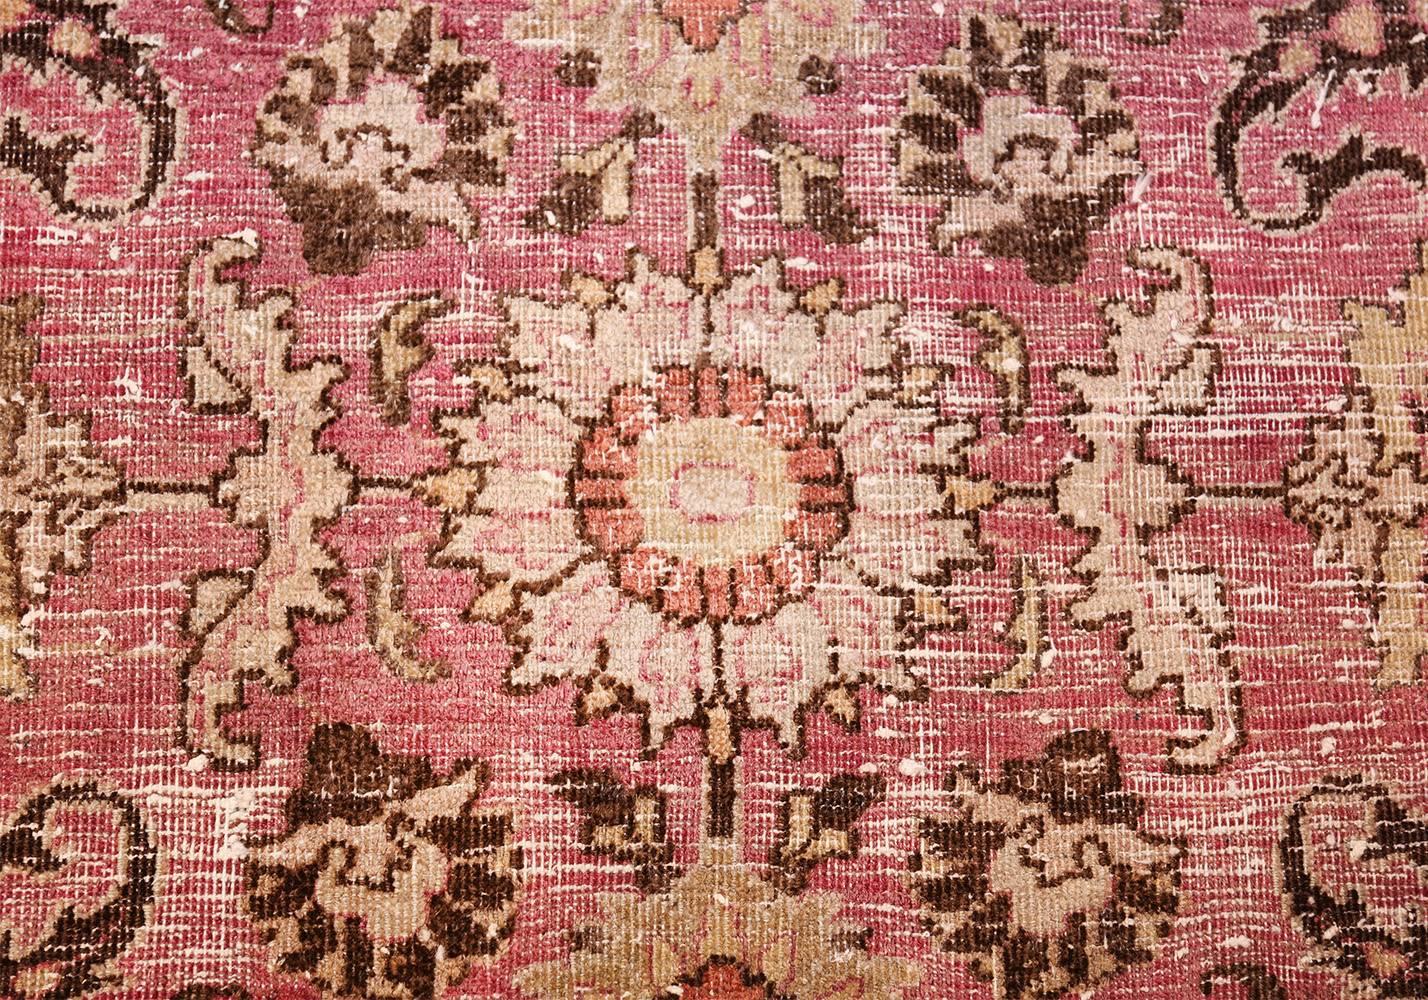 Antique Persian Khorassan rug, Persia, circa 1920. This shabby chic antique Khorassan carpet embodies the delicate, wild loveliness of a lush garden. Pale crimson and earthy shades of cream and brown comprise the main color scheme of this striking